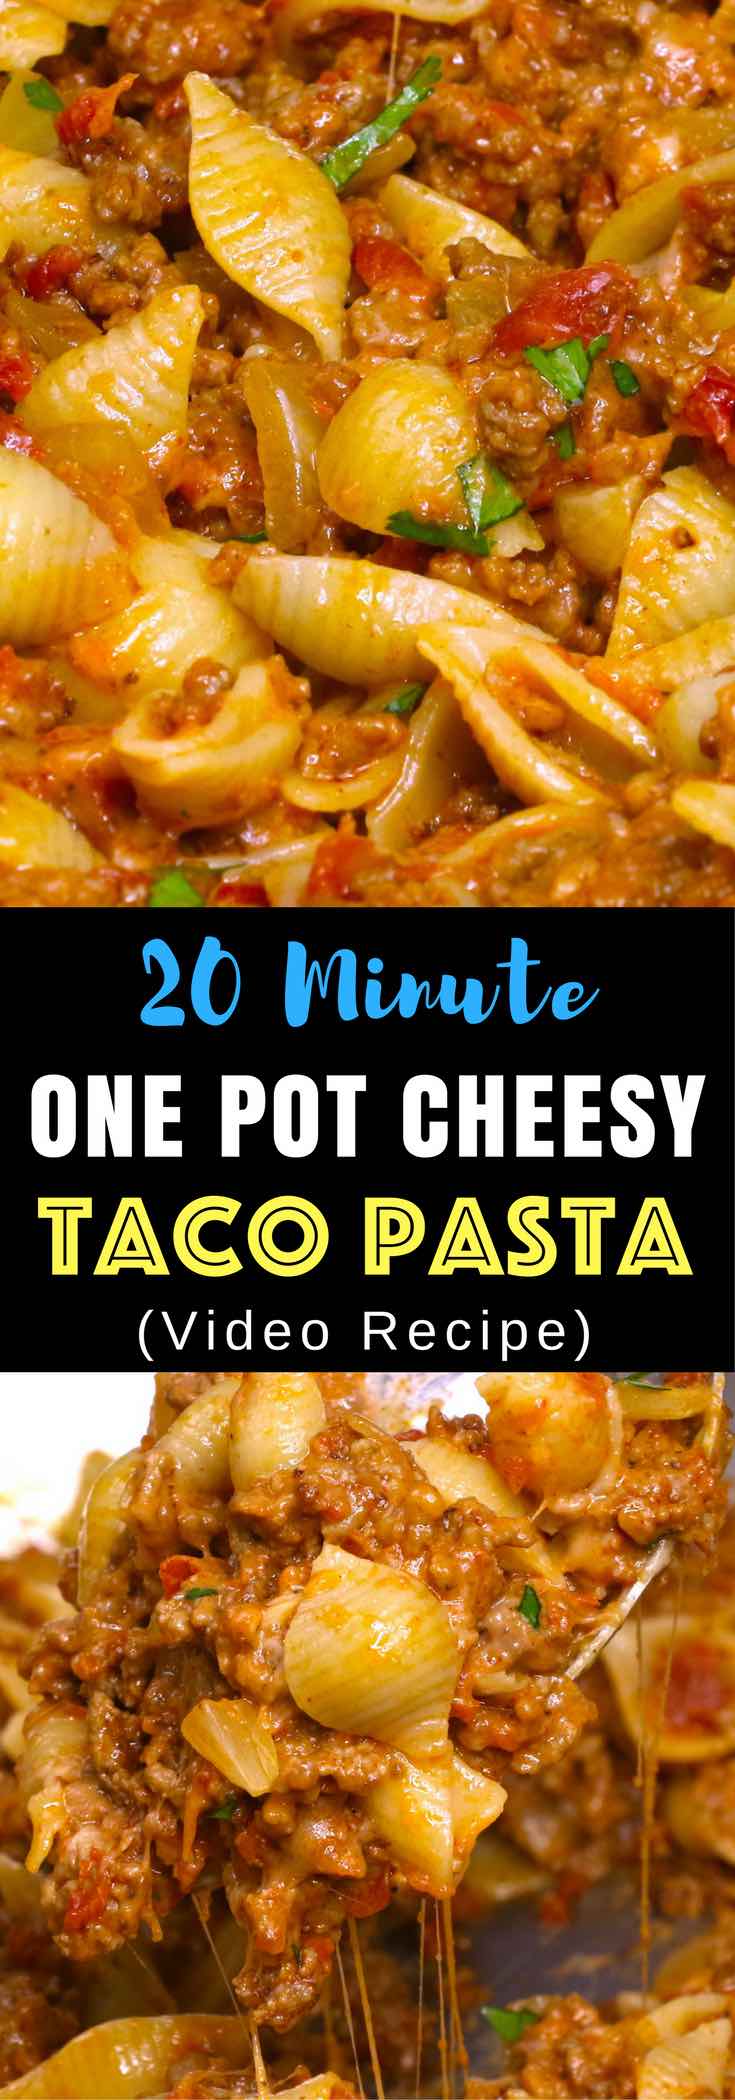 : One-pot Cheesy Taco Pasta – One of the easiest quick dinner recipes. It’s loaded with ground beef and shredded cheddar cheese. So delicious. This simple and easy recipe comes together in 20 minutes. Quick and easy recipe. Video recipe. 